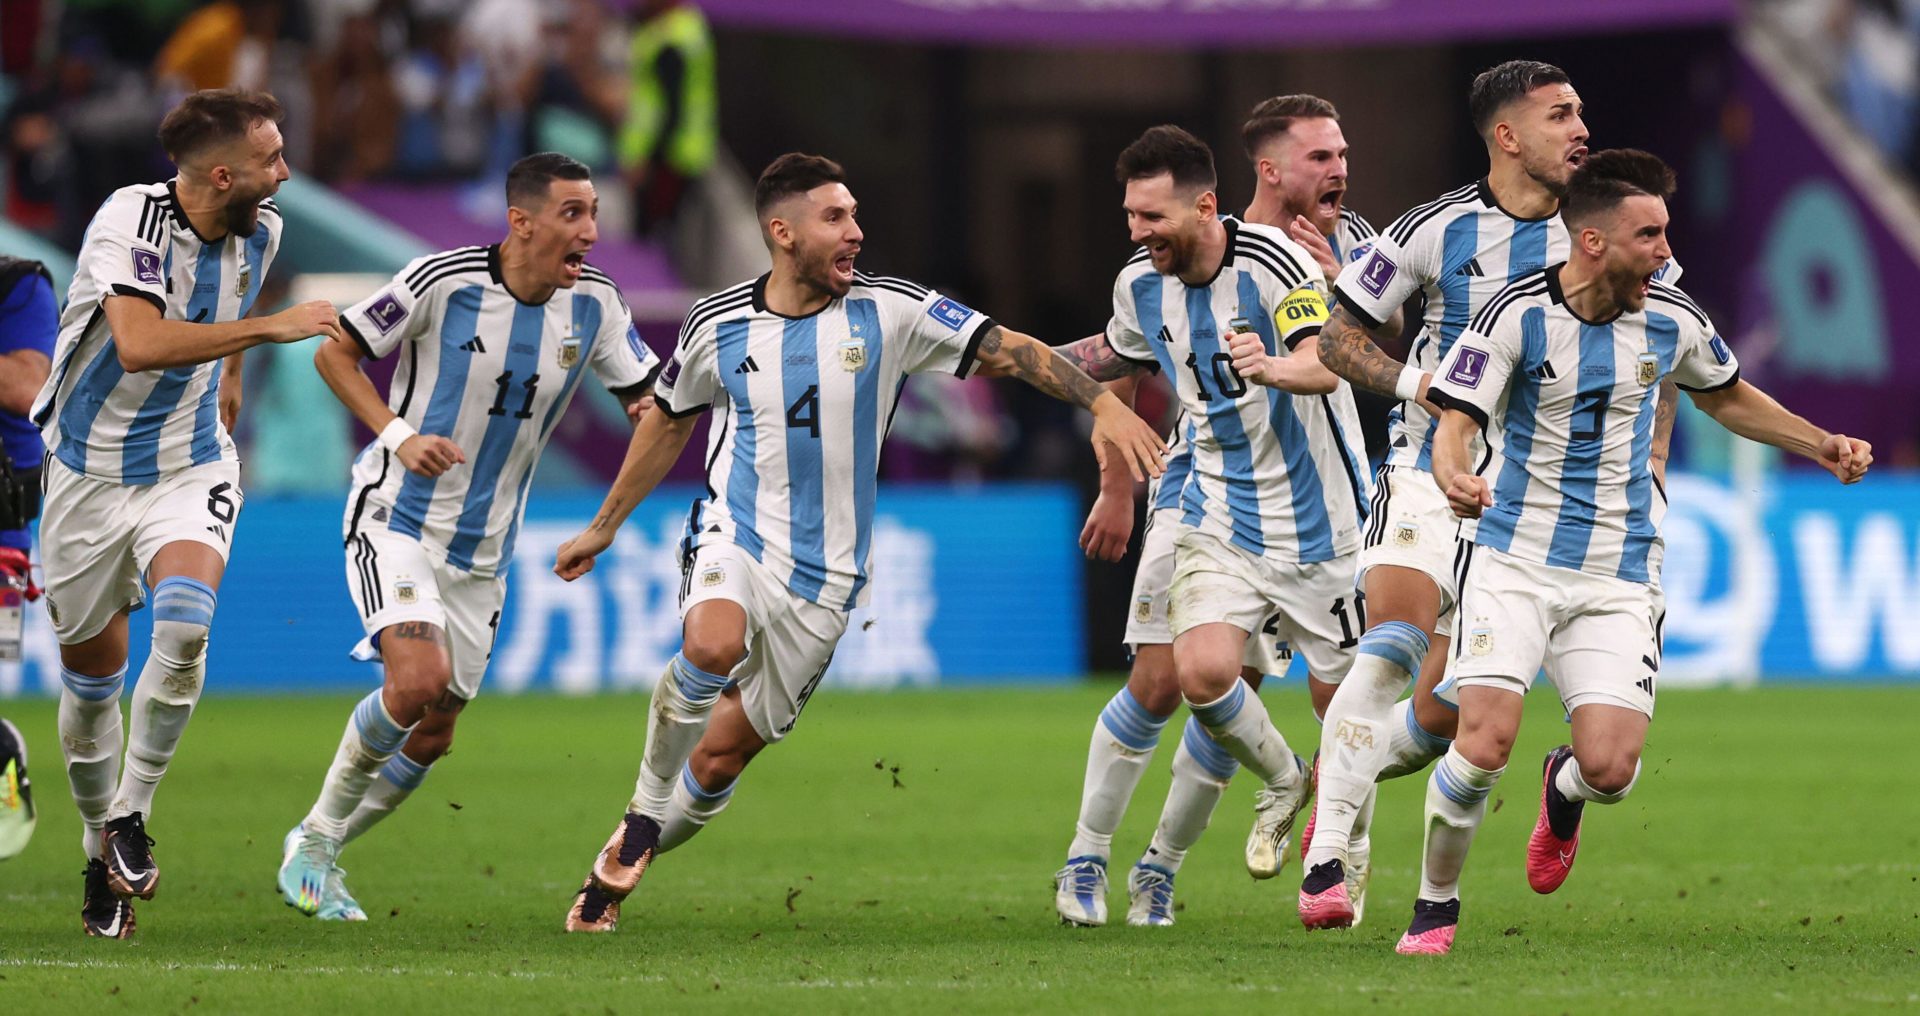 Argentina celebrate the win during the FIFA World Cup 2022 match at Lusail Stadium, Doha, 09-12-2022. Image: David Klein/Alamy